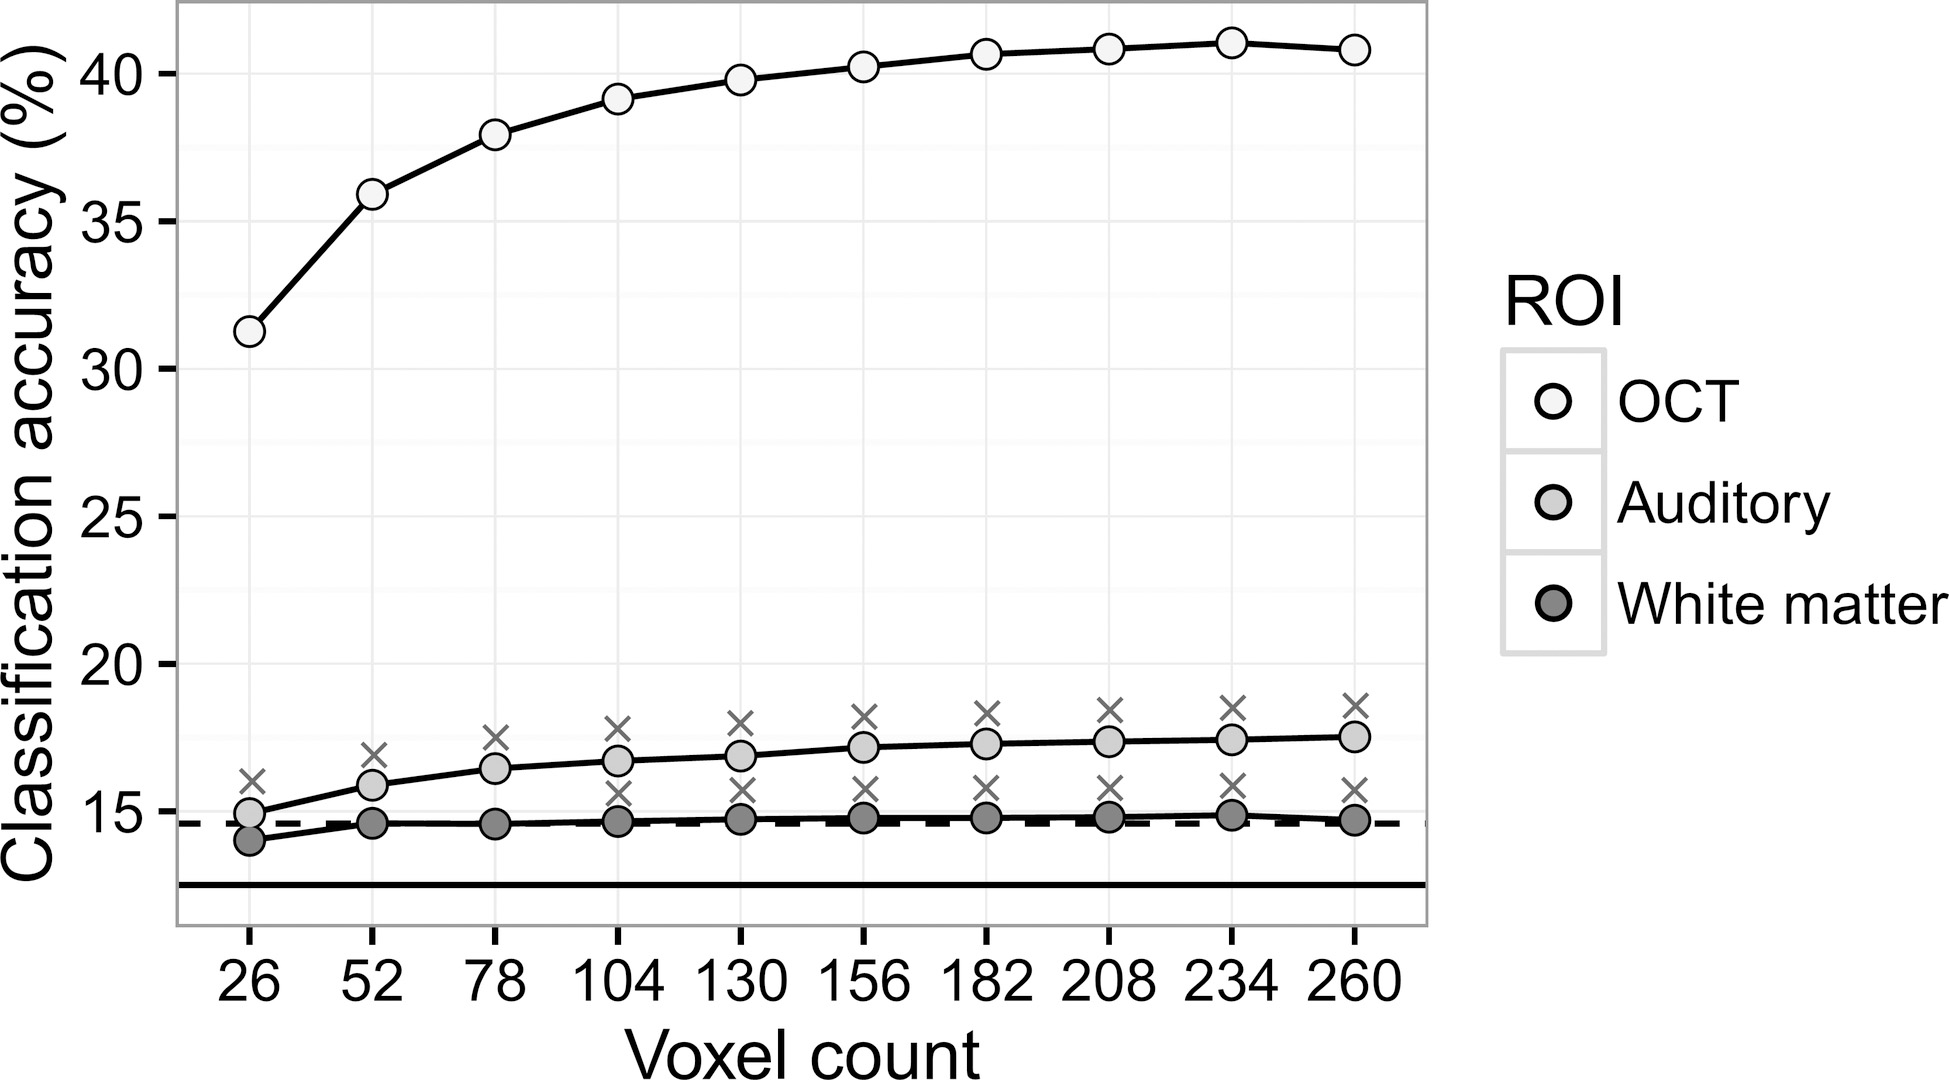 Accuracies for classification across eight categories. The results are averaged across 6 subjects. The solid horizontal line indicates the chance-level accuracy (12.5%). The dashed line indicates the critical value (14.58%) for better-than-chance decoding based on the binomial test (a= 0.05), with 672 activation patterns involved for each subject. Crosses (“×”) indicate false positive results.